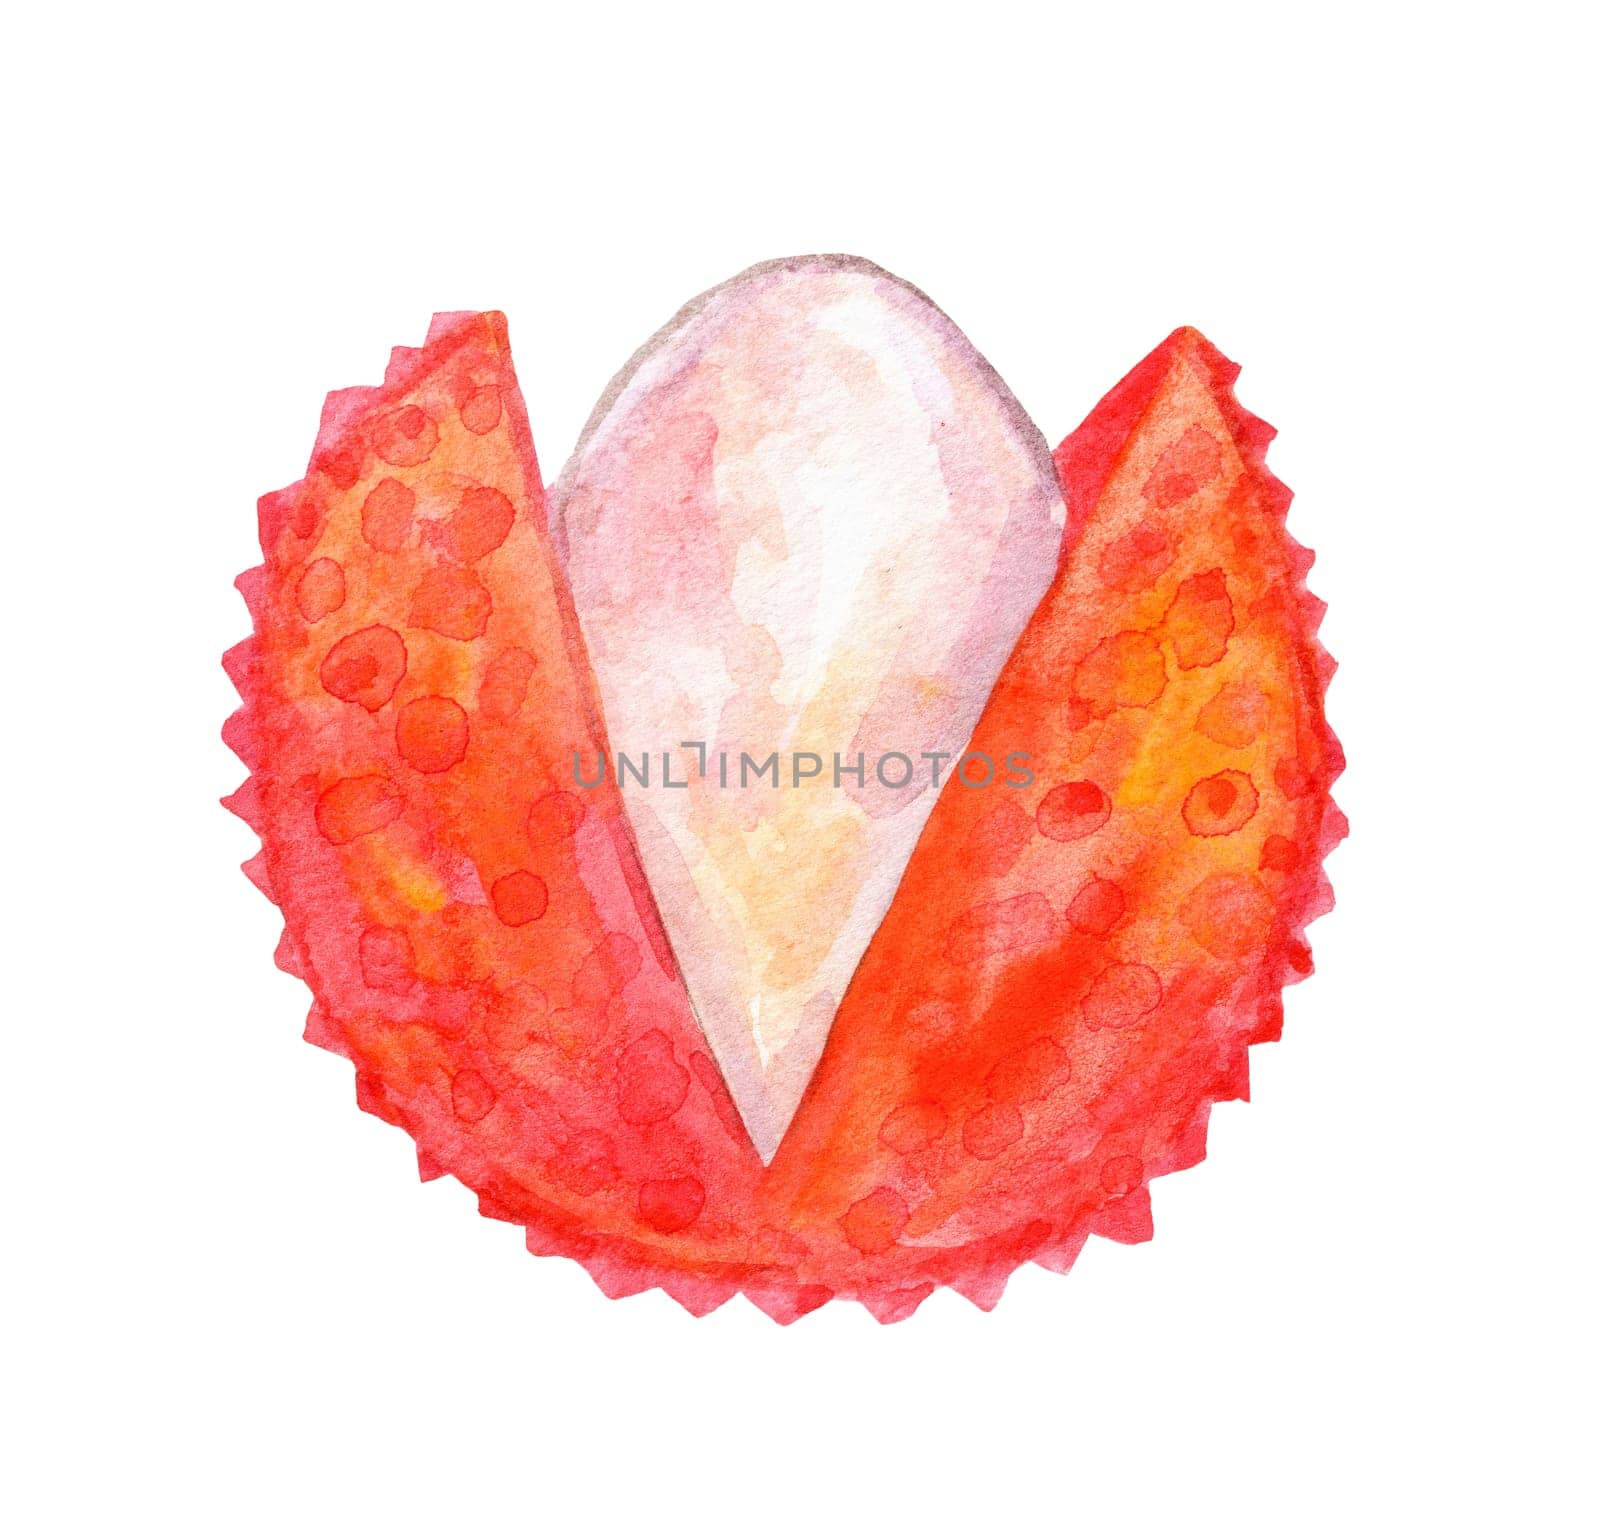 Watercolor cut lychee fruit illustration isolated on white background